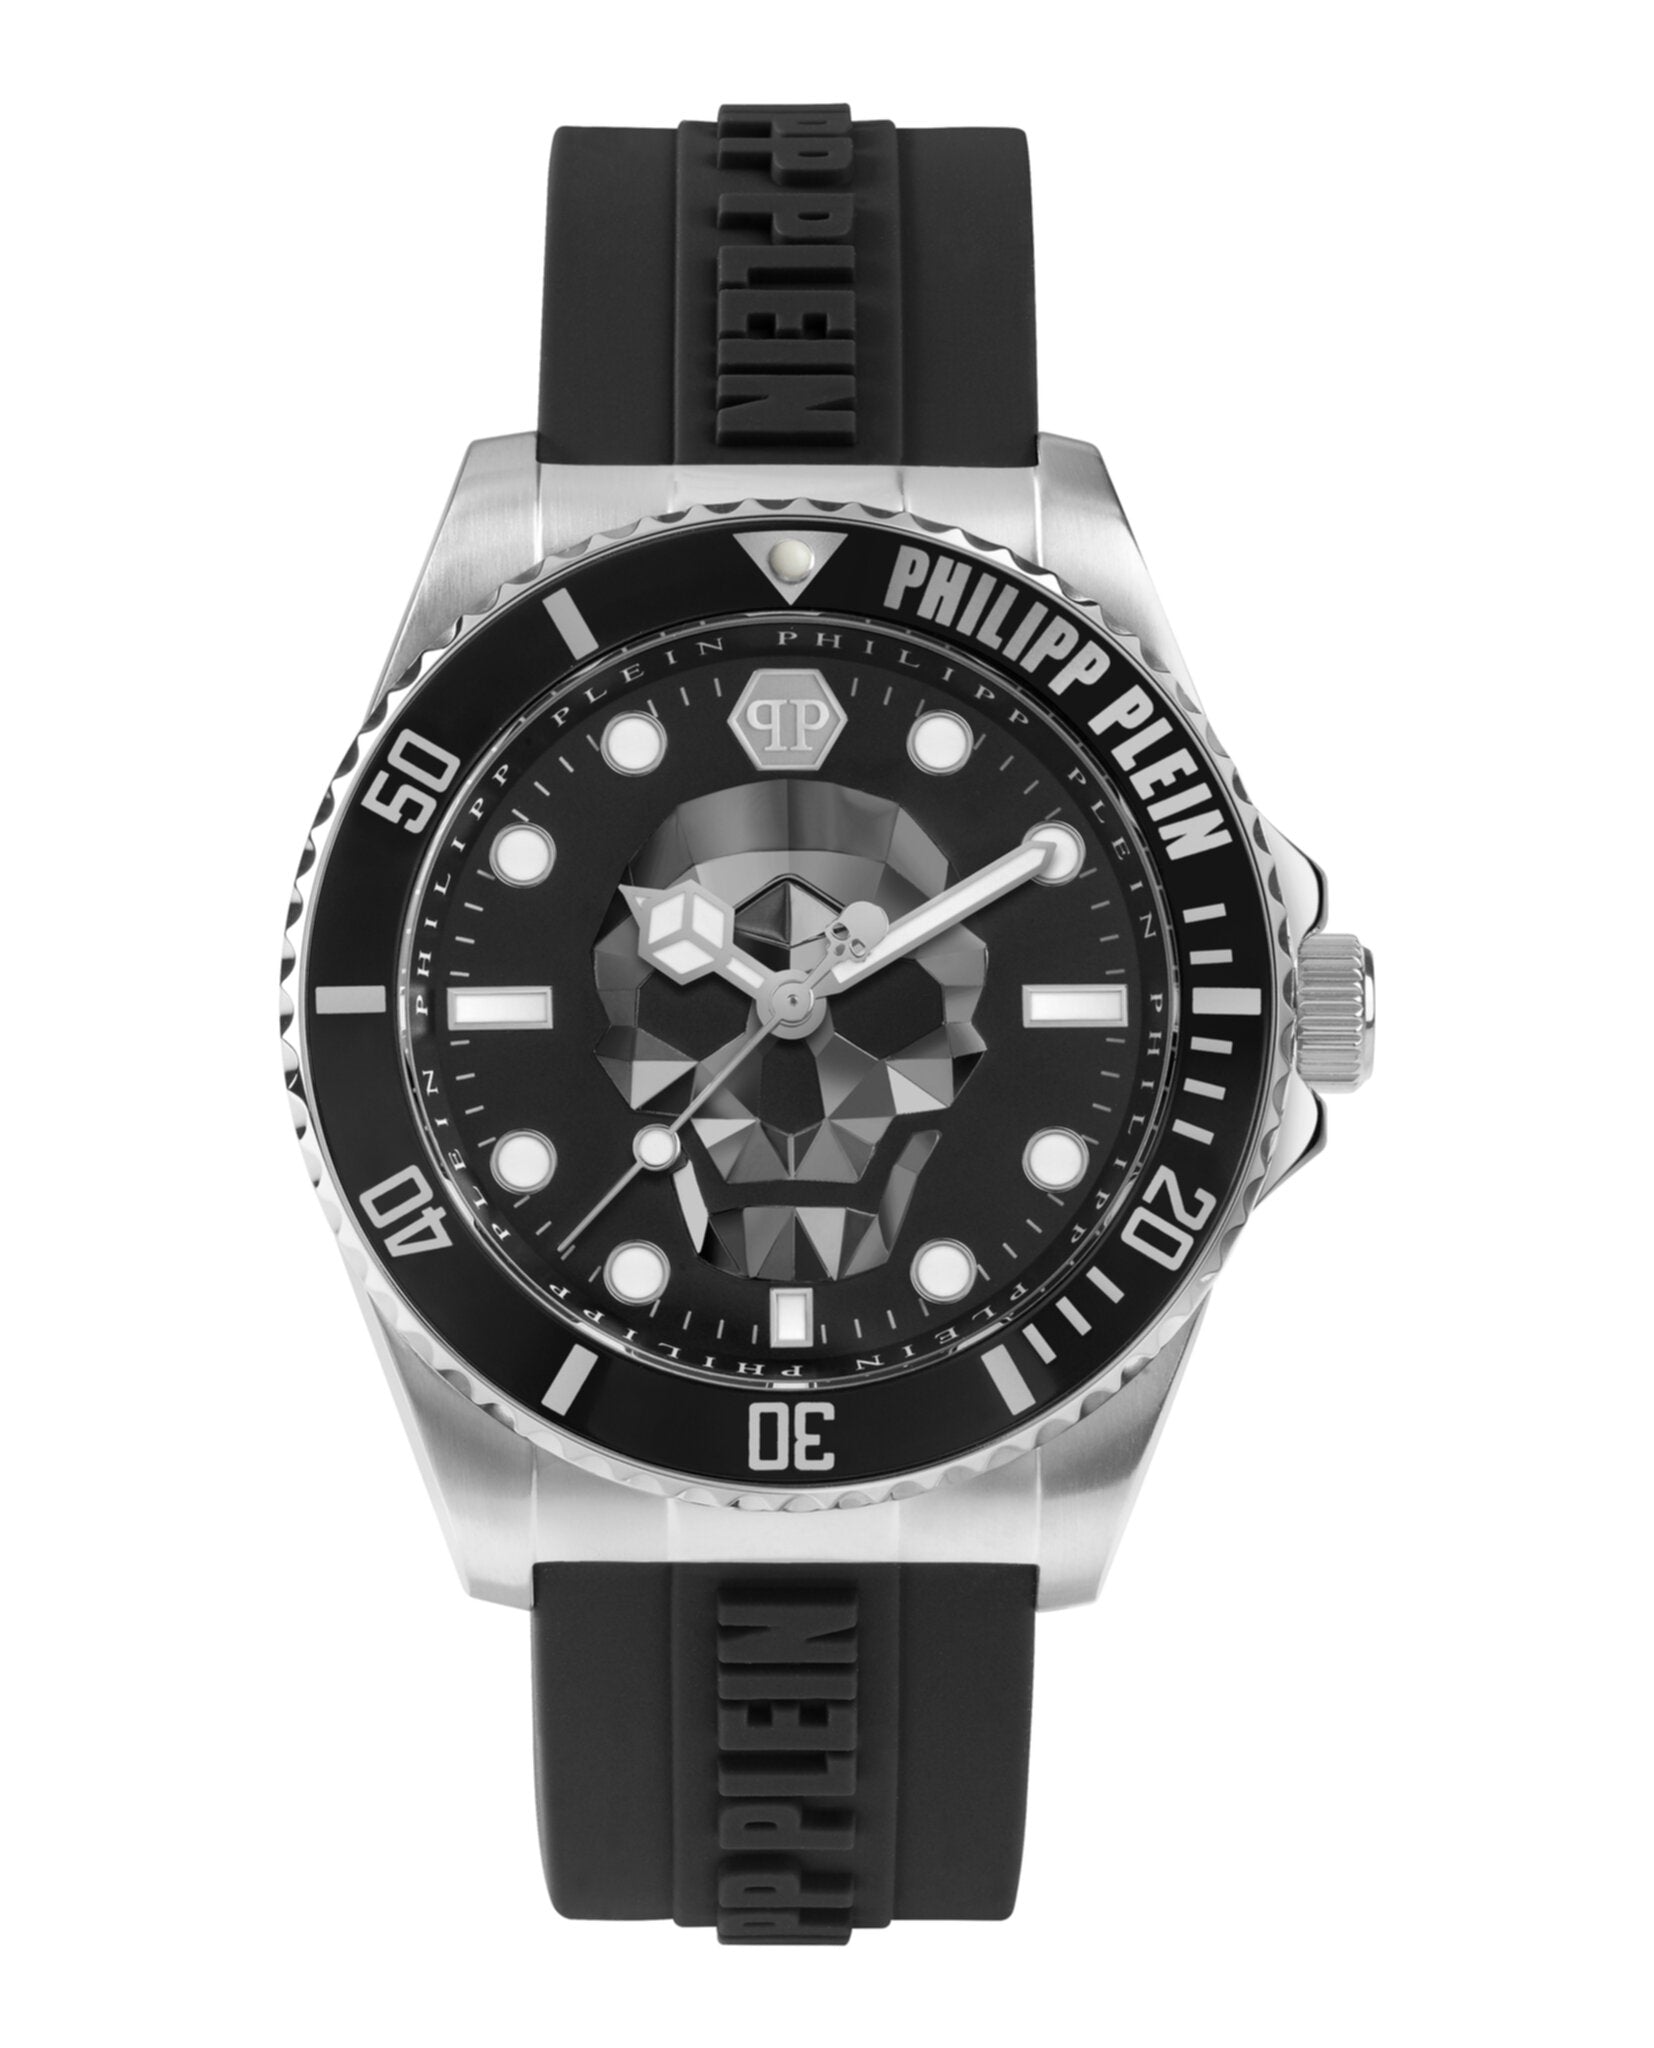 The $kull Diver Silicone Watch